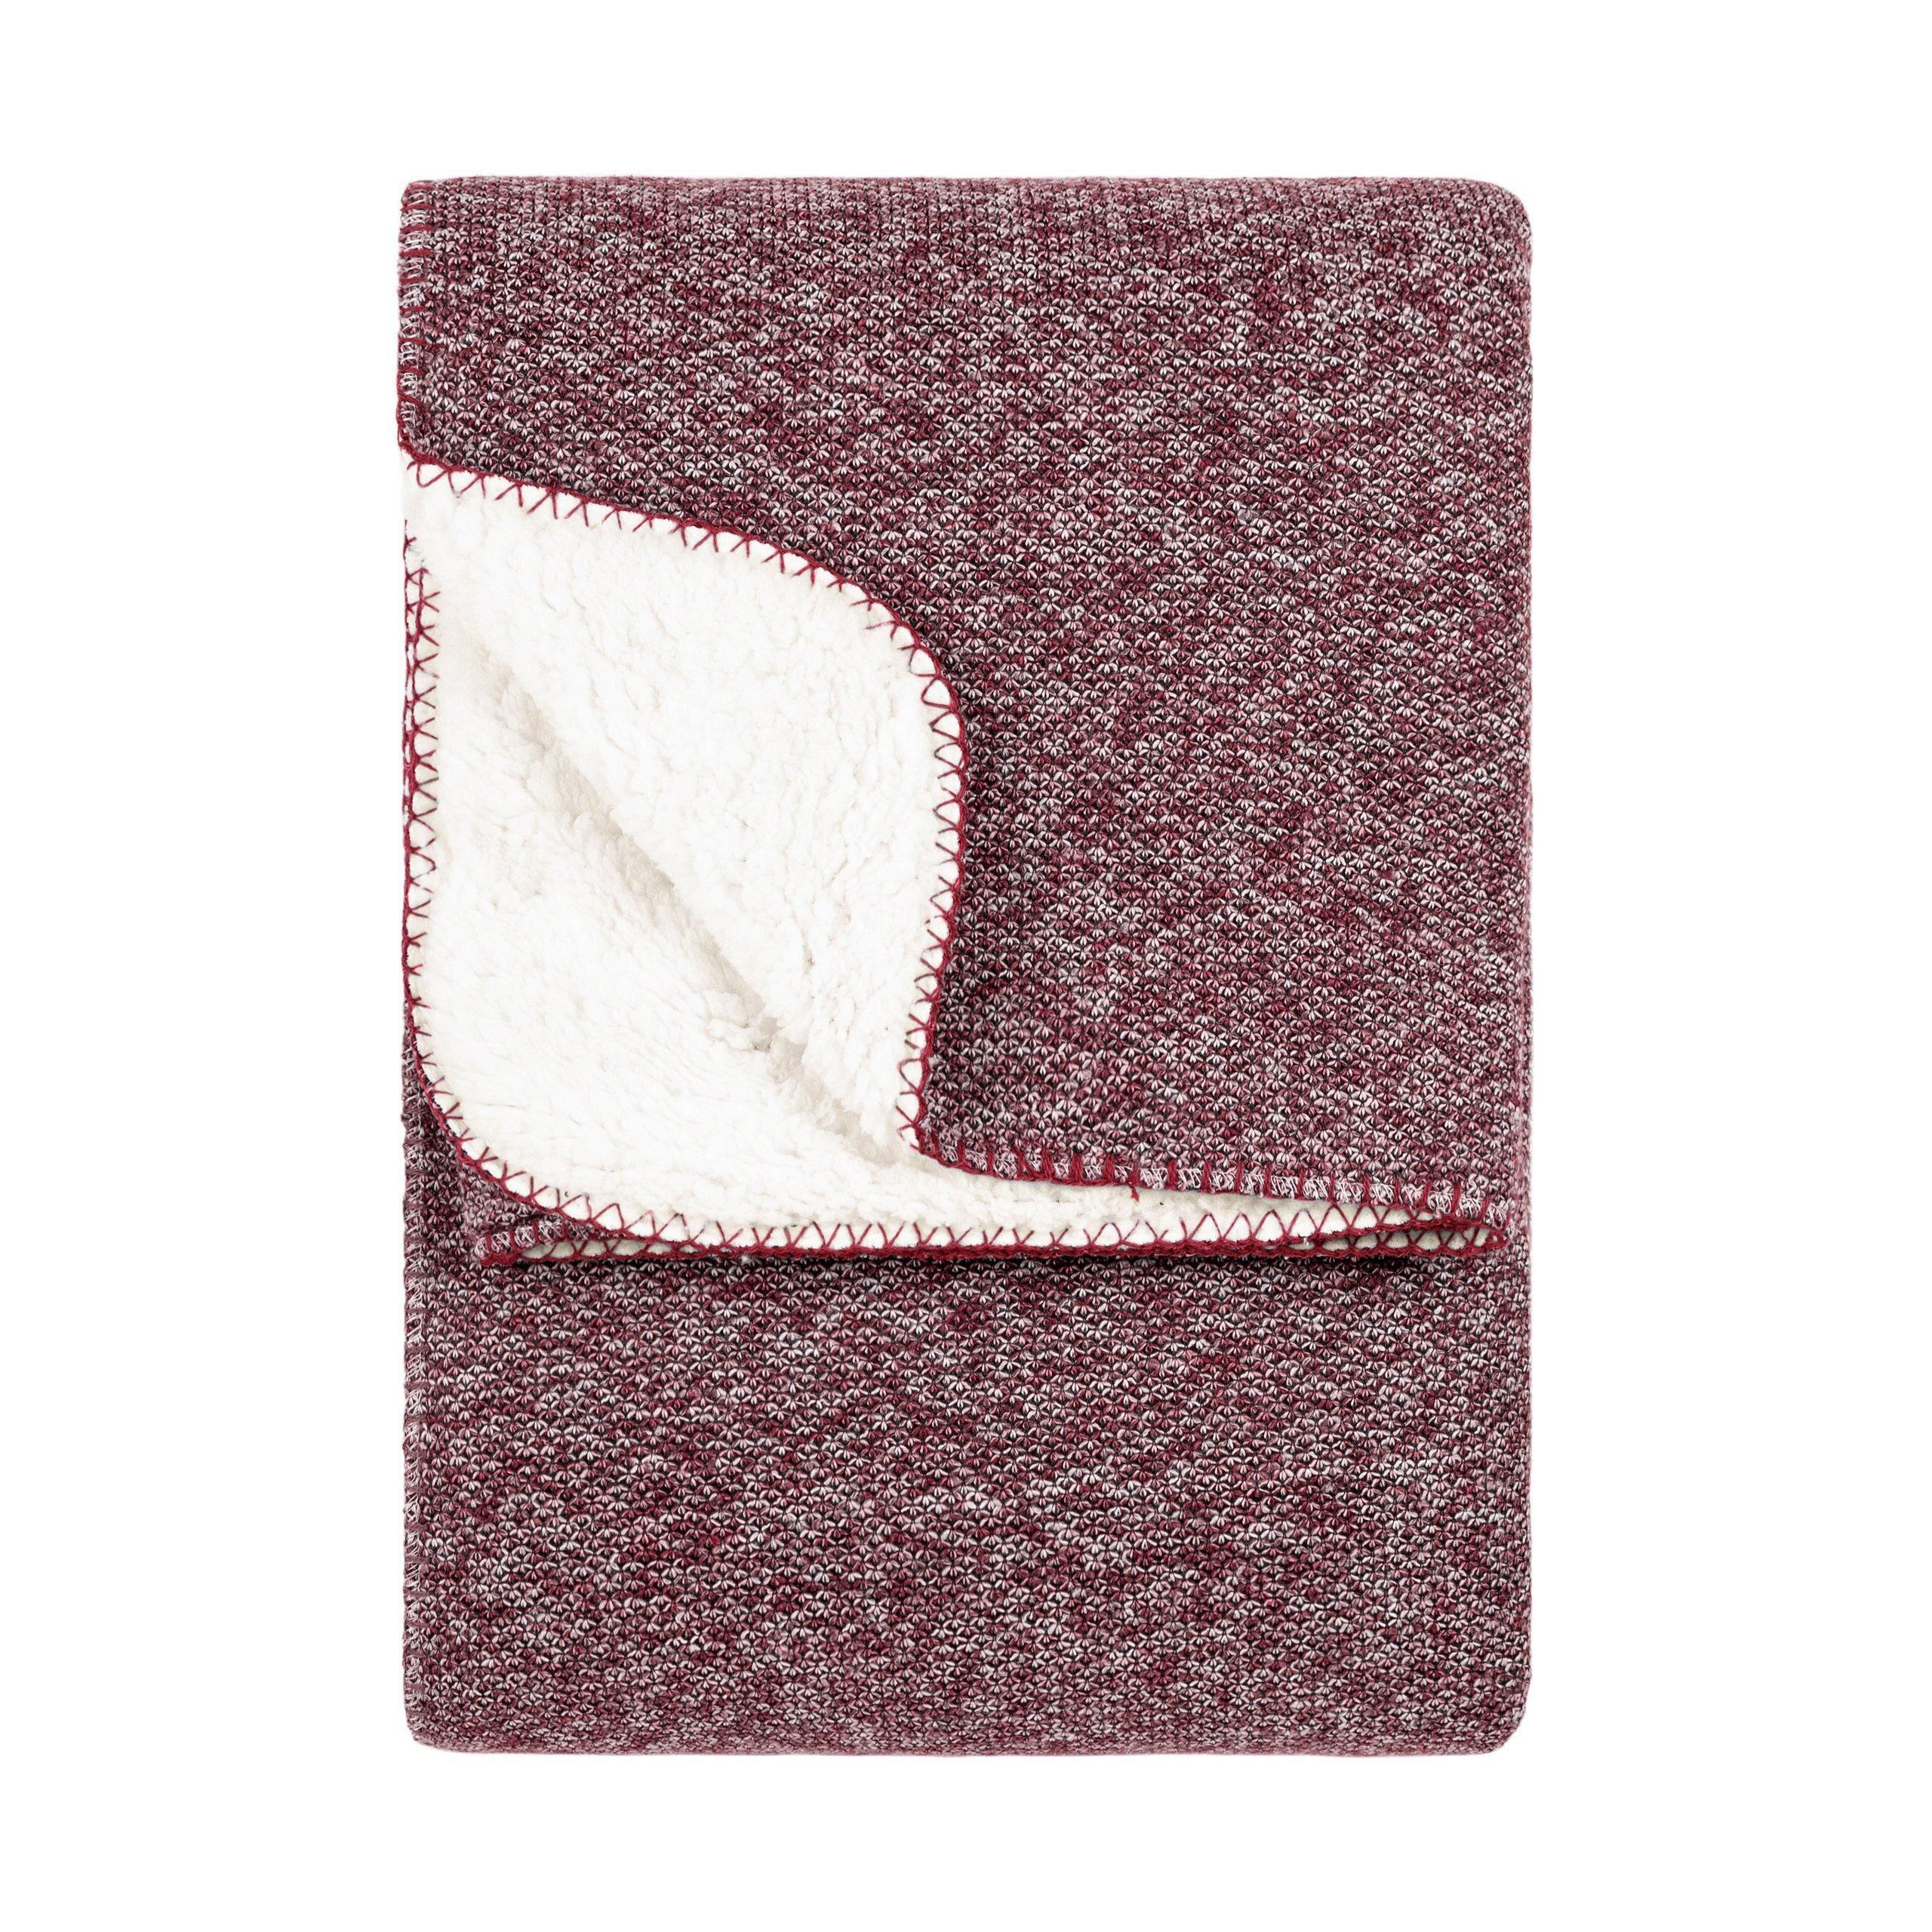 Nurrel Knitted Sherpa Reverse Throw - image 1